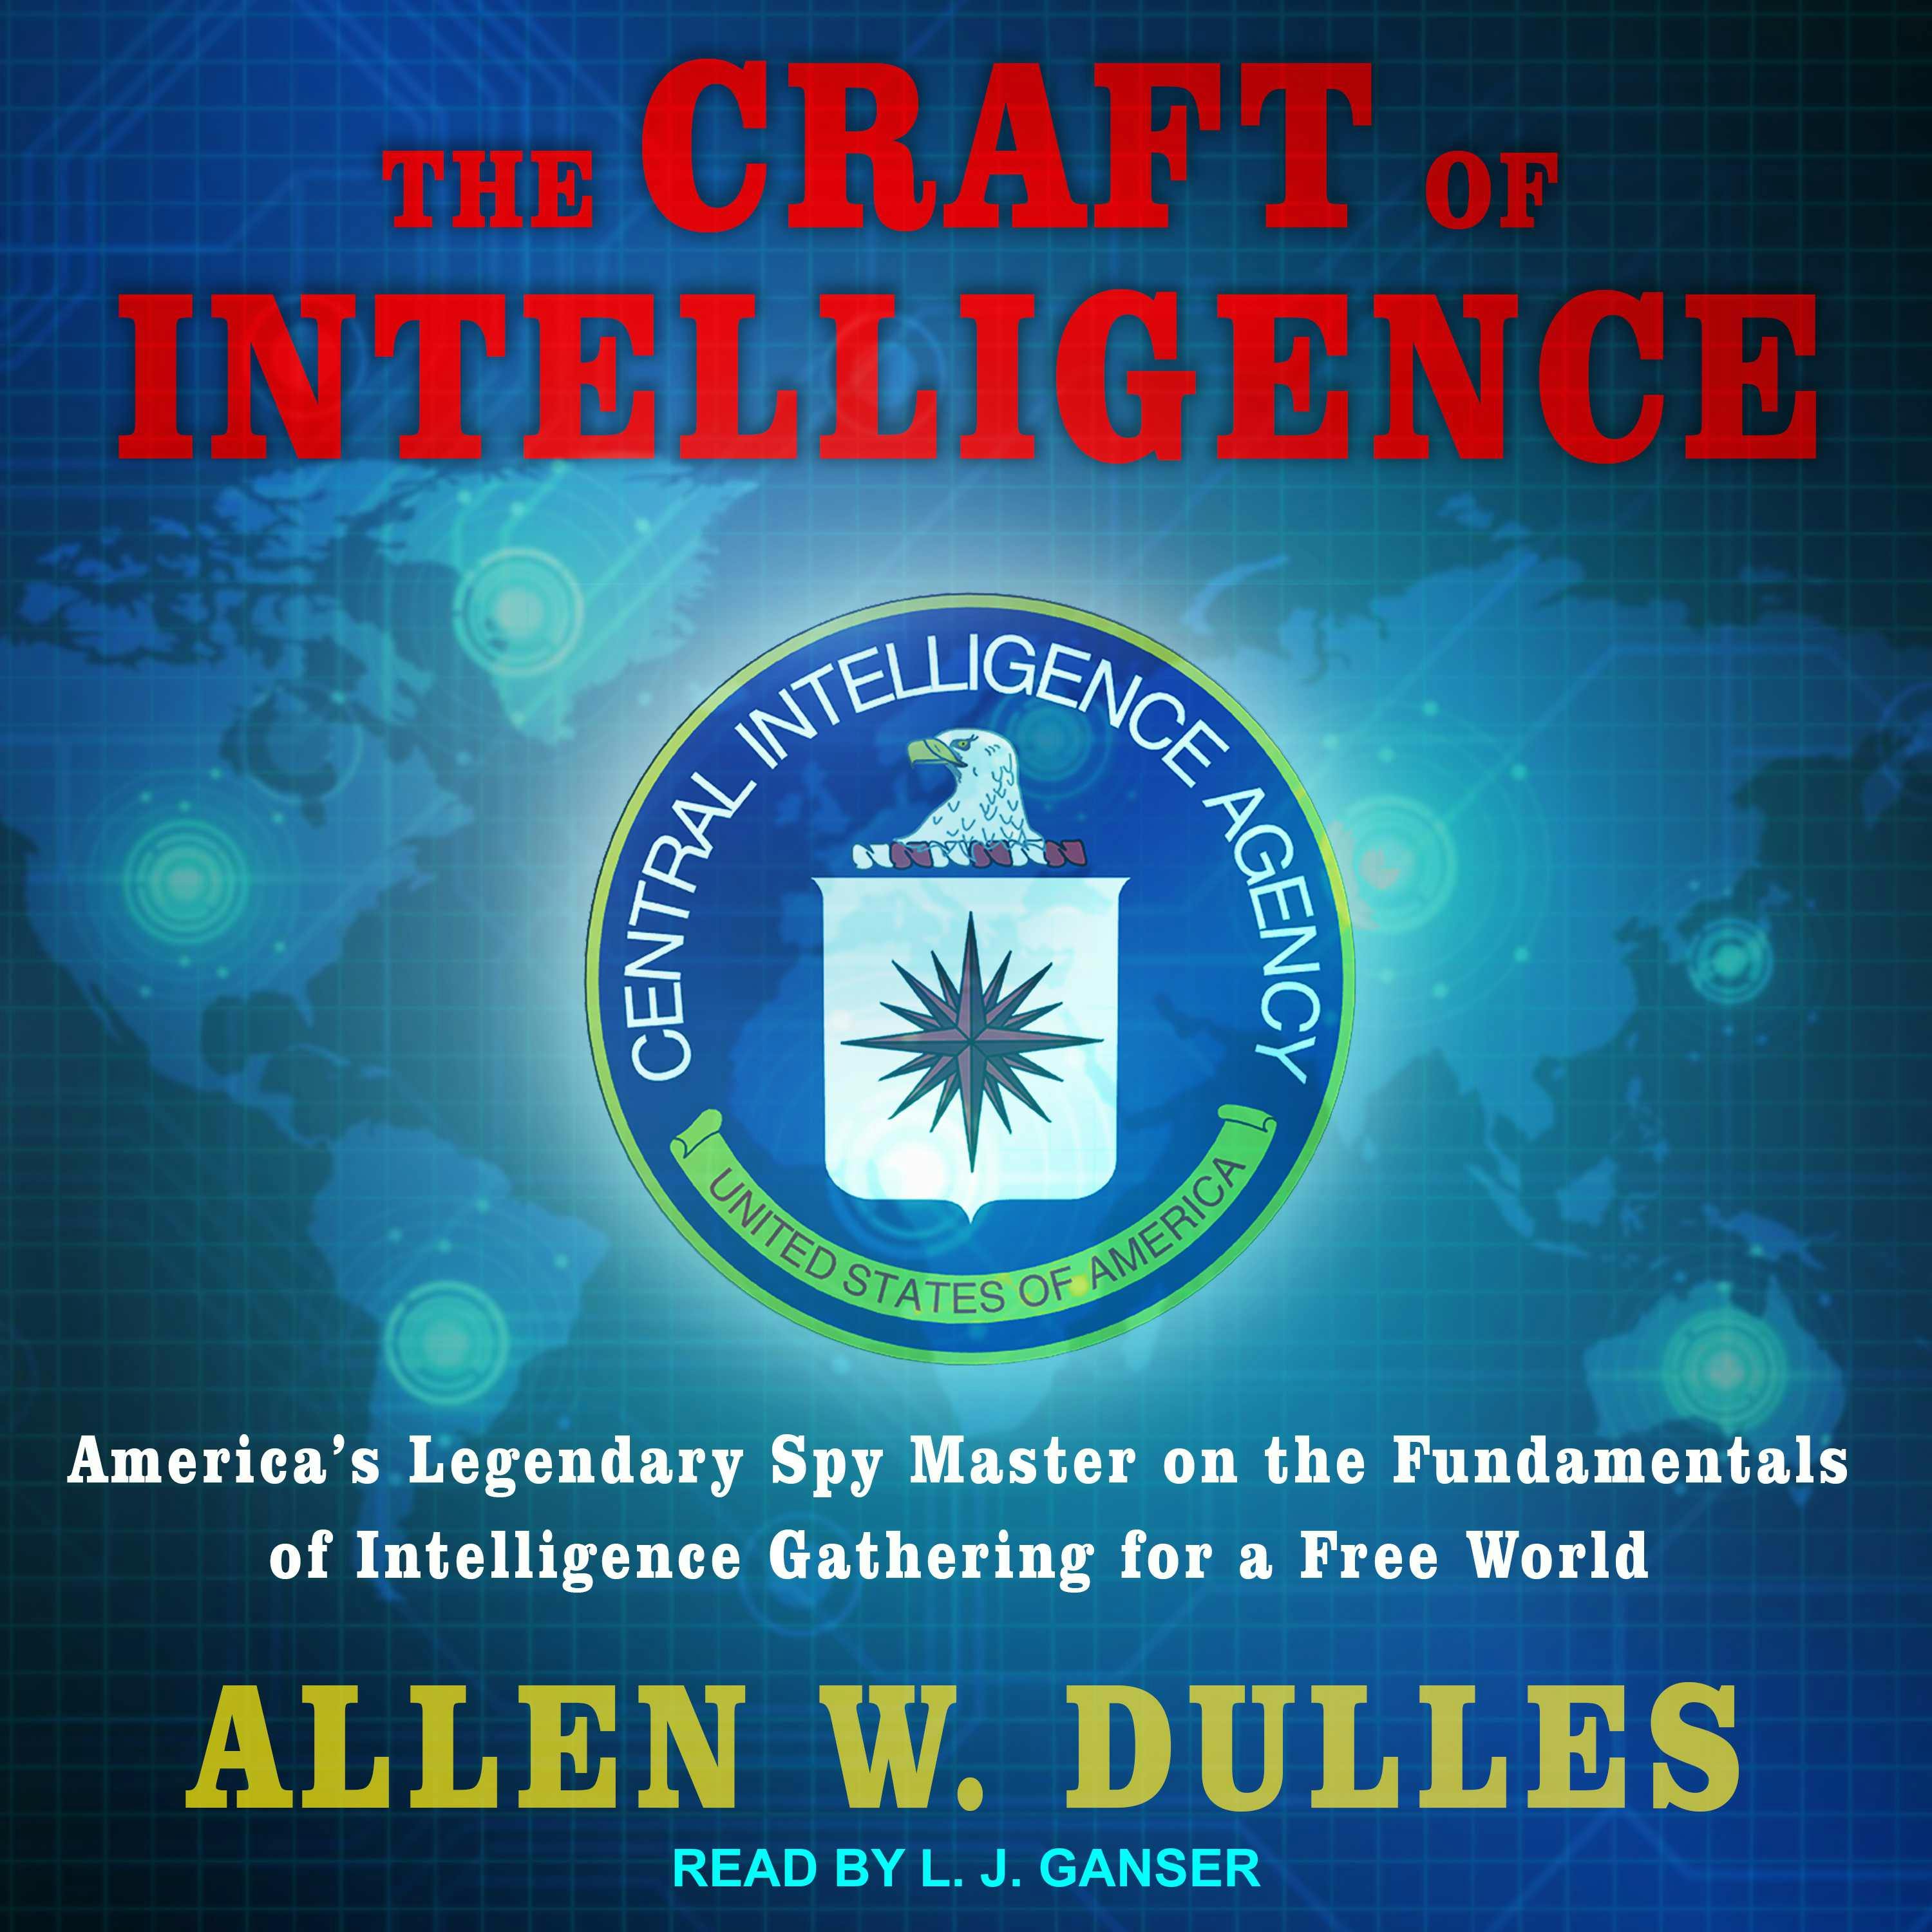 The Craft of Intelligence: America's Legendary Spy Master on the Fundamentals of Intelligence Gathering for a Free World - Allen W. Dulles